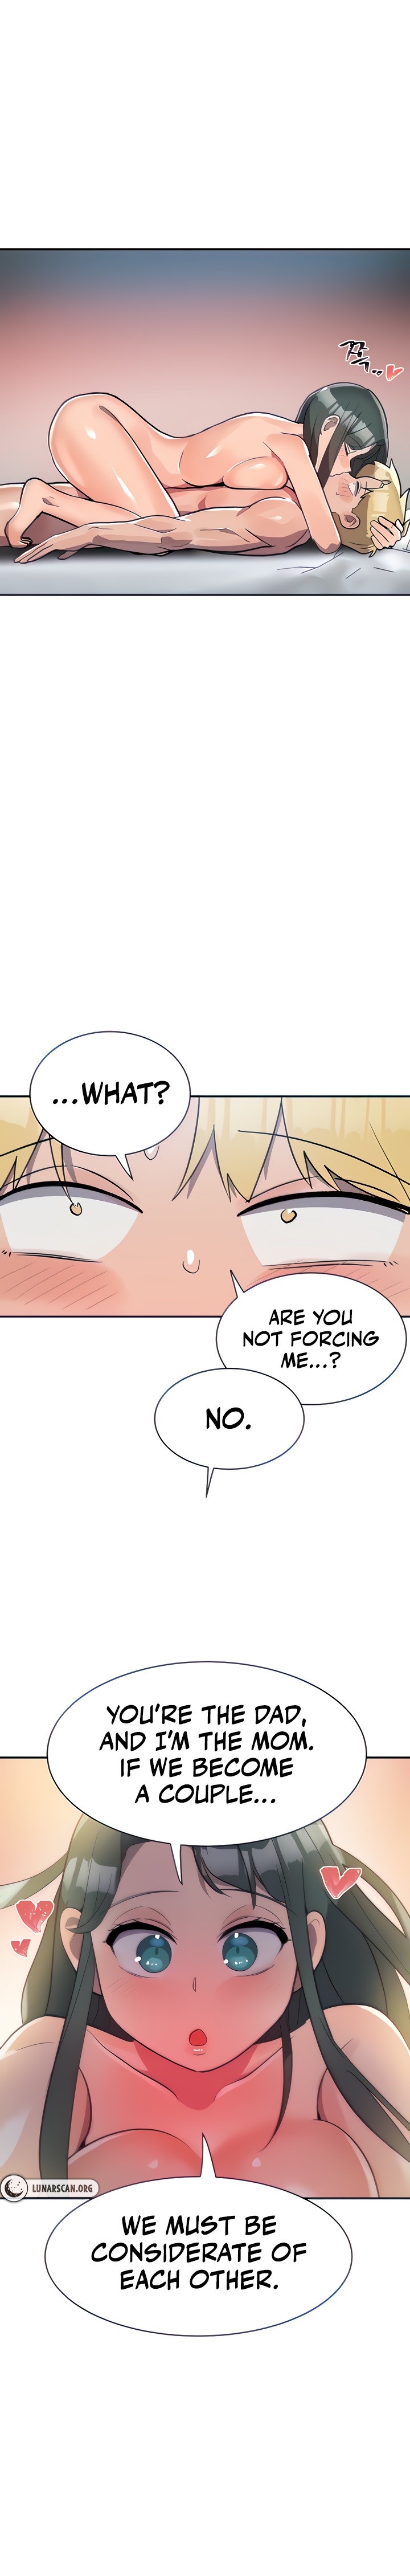 Relationship Reverse Button: Let’s Educate That Arrogant Girl - Chapter 9 Page 3